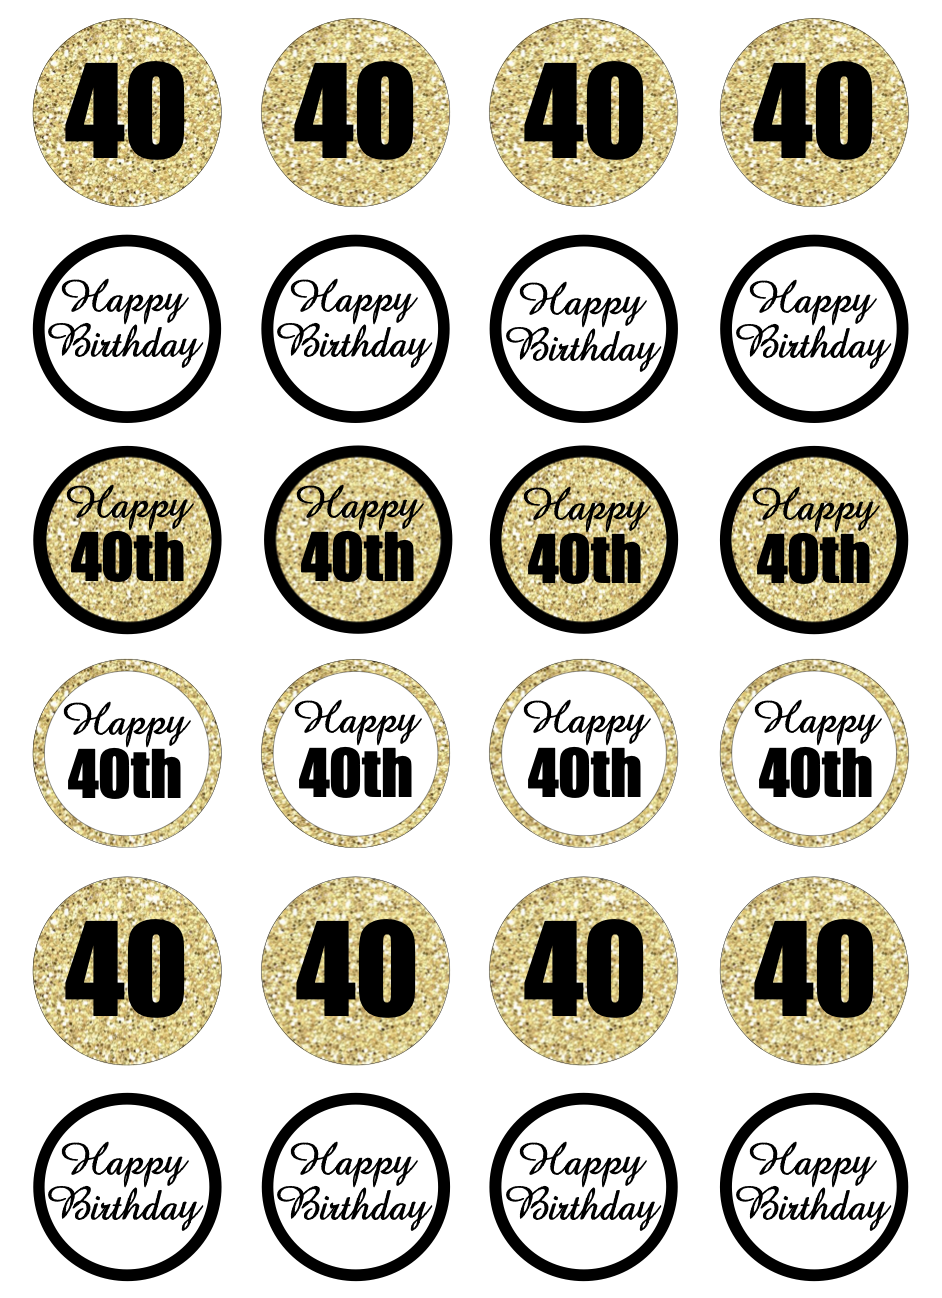 40th Birthday Black & Gold Cupcake Edible Icing Image Toppers